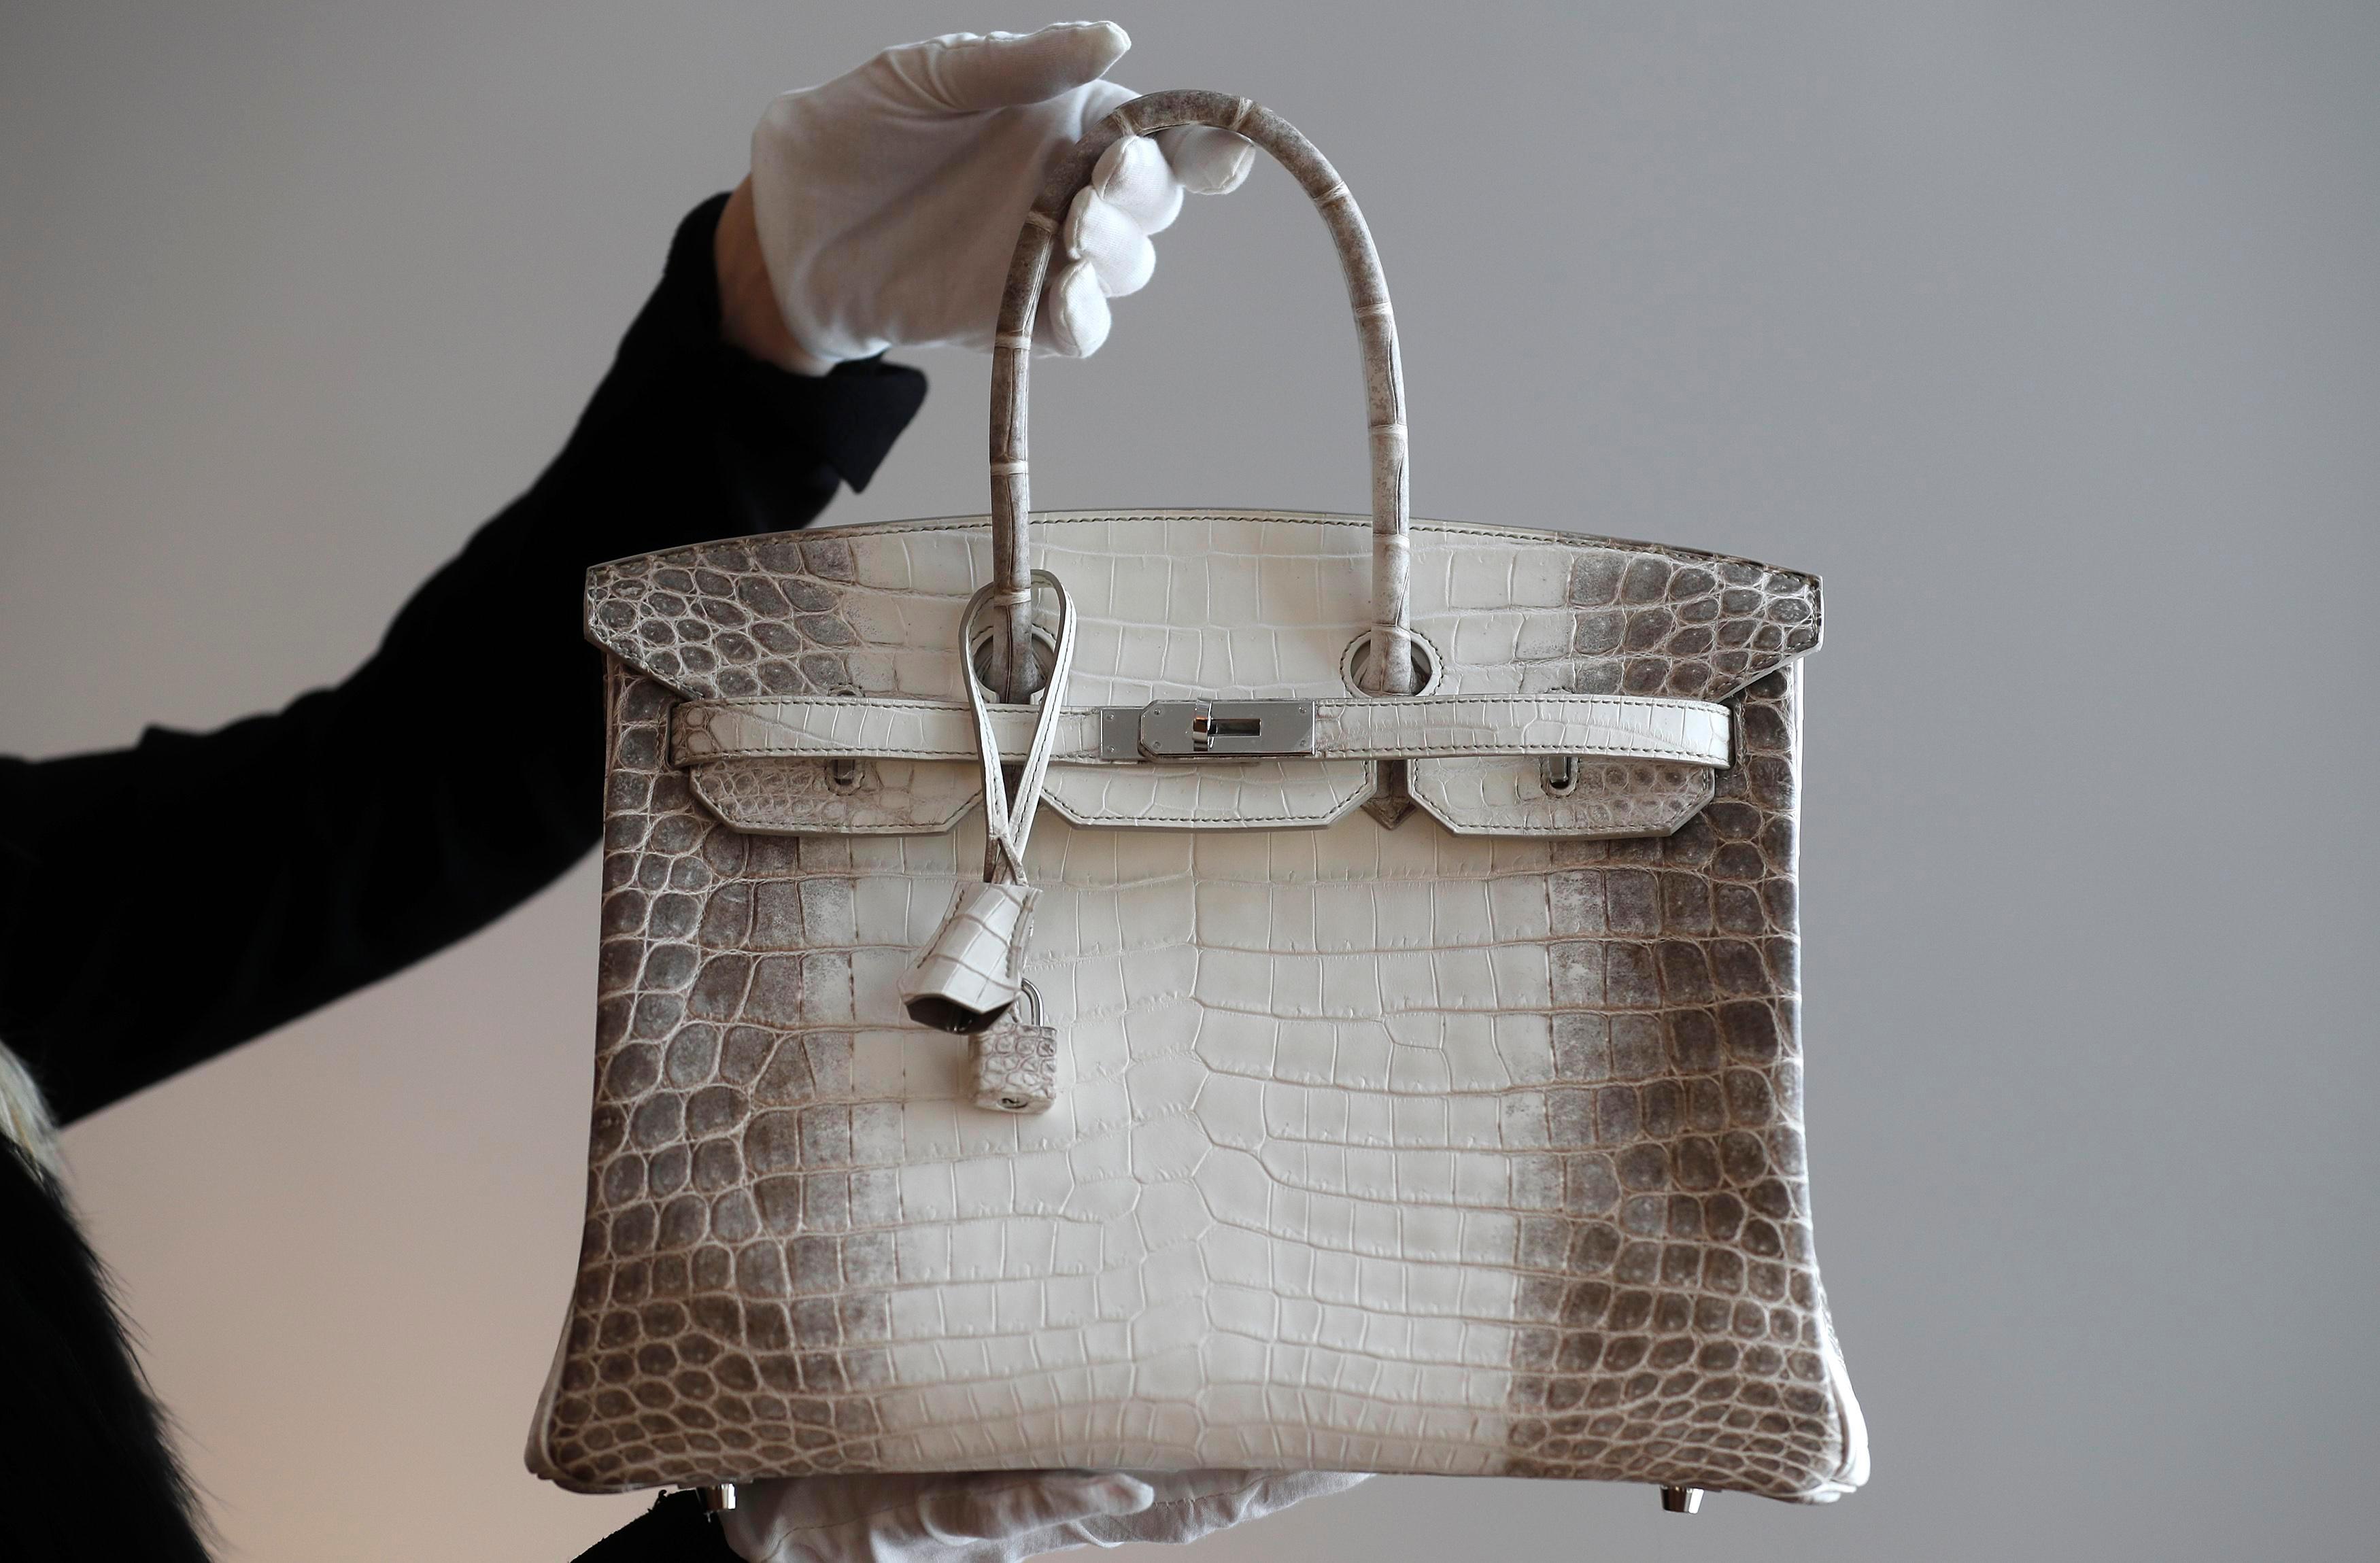 Top 5 Most Expensive Hermès Bags | Luxity Blog